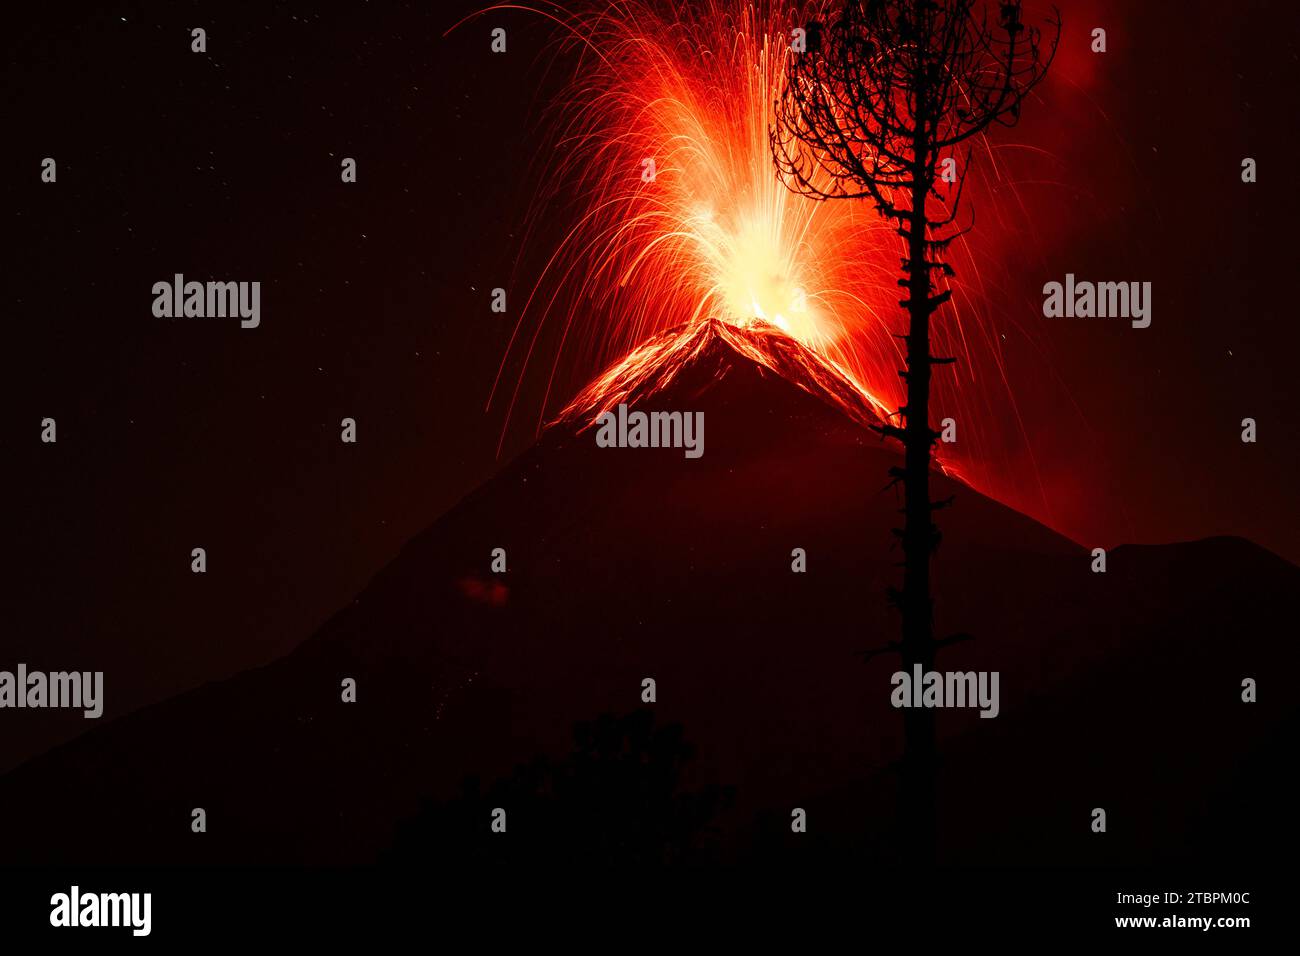 A scenic nighttime image featuring an active volcano with red lights illuminating it from below Stock Photo